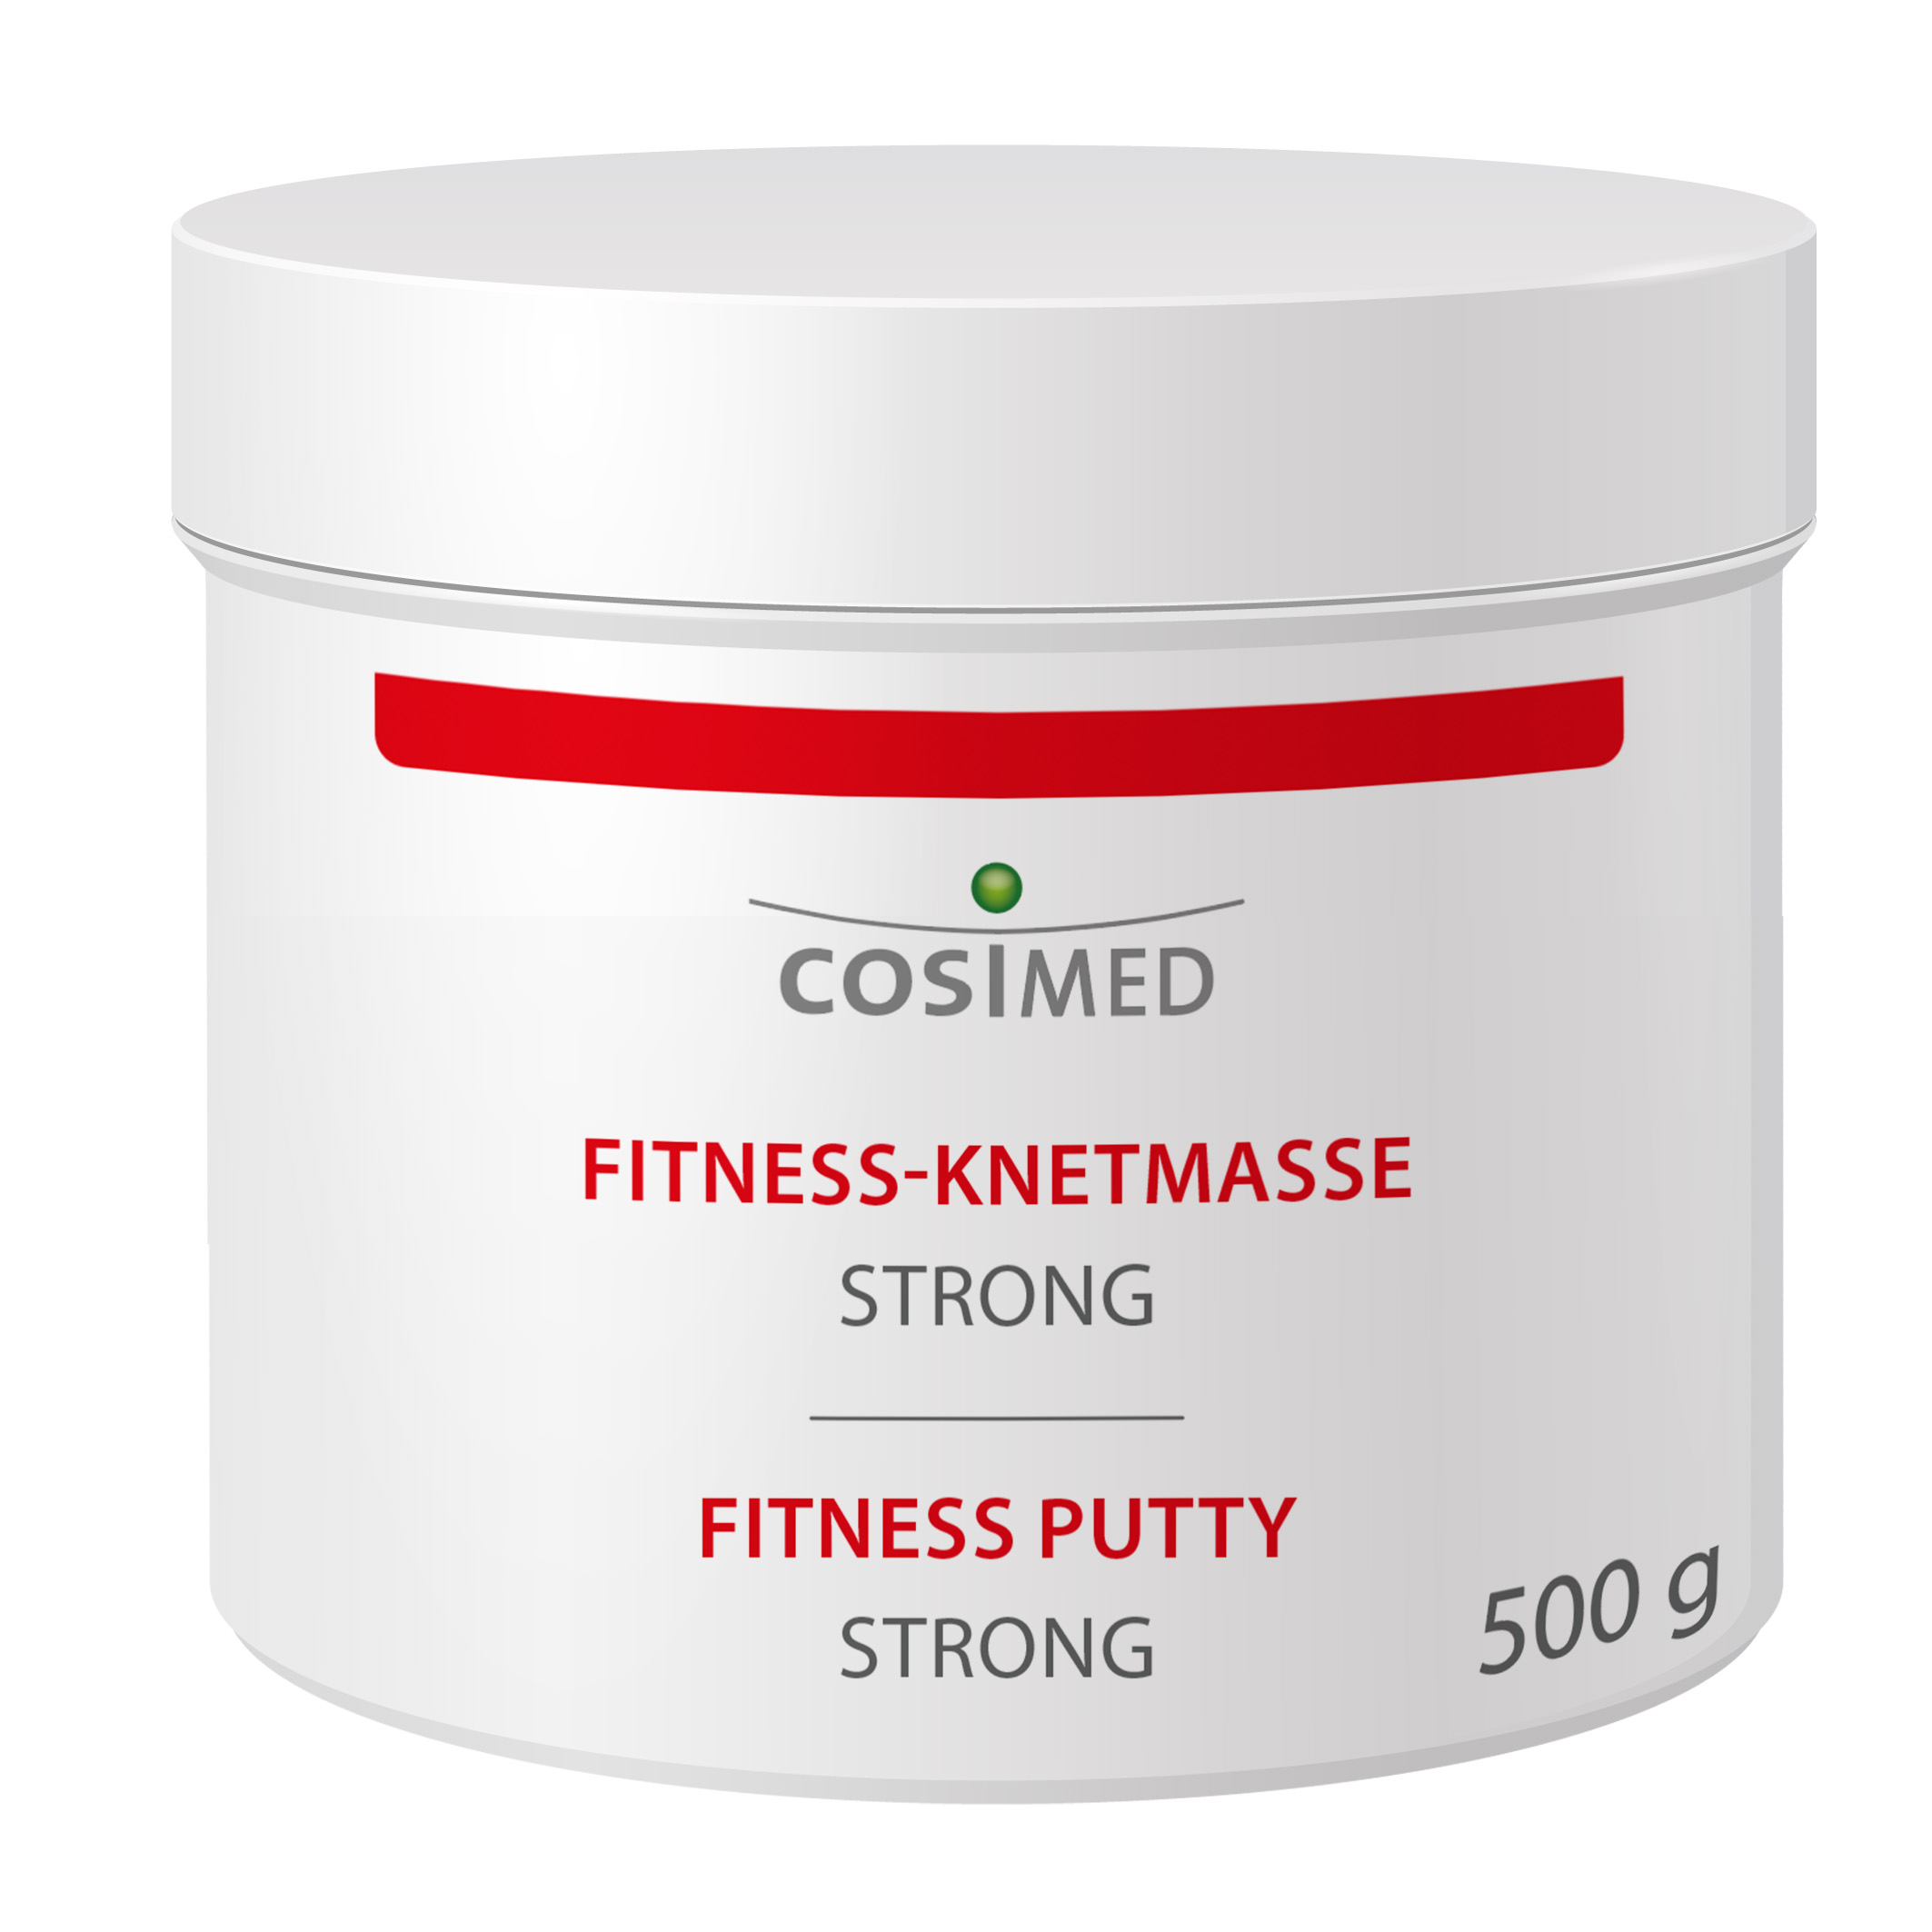 cosiMed Fitness-Knetmasse strong 500 g Dose